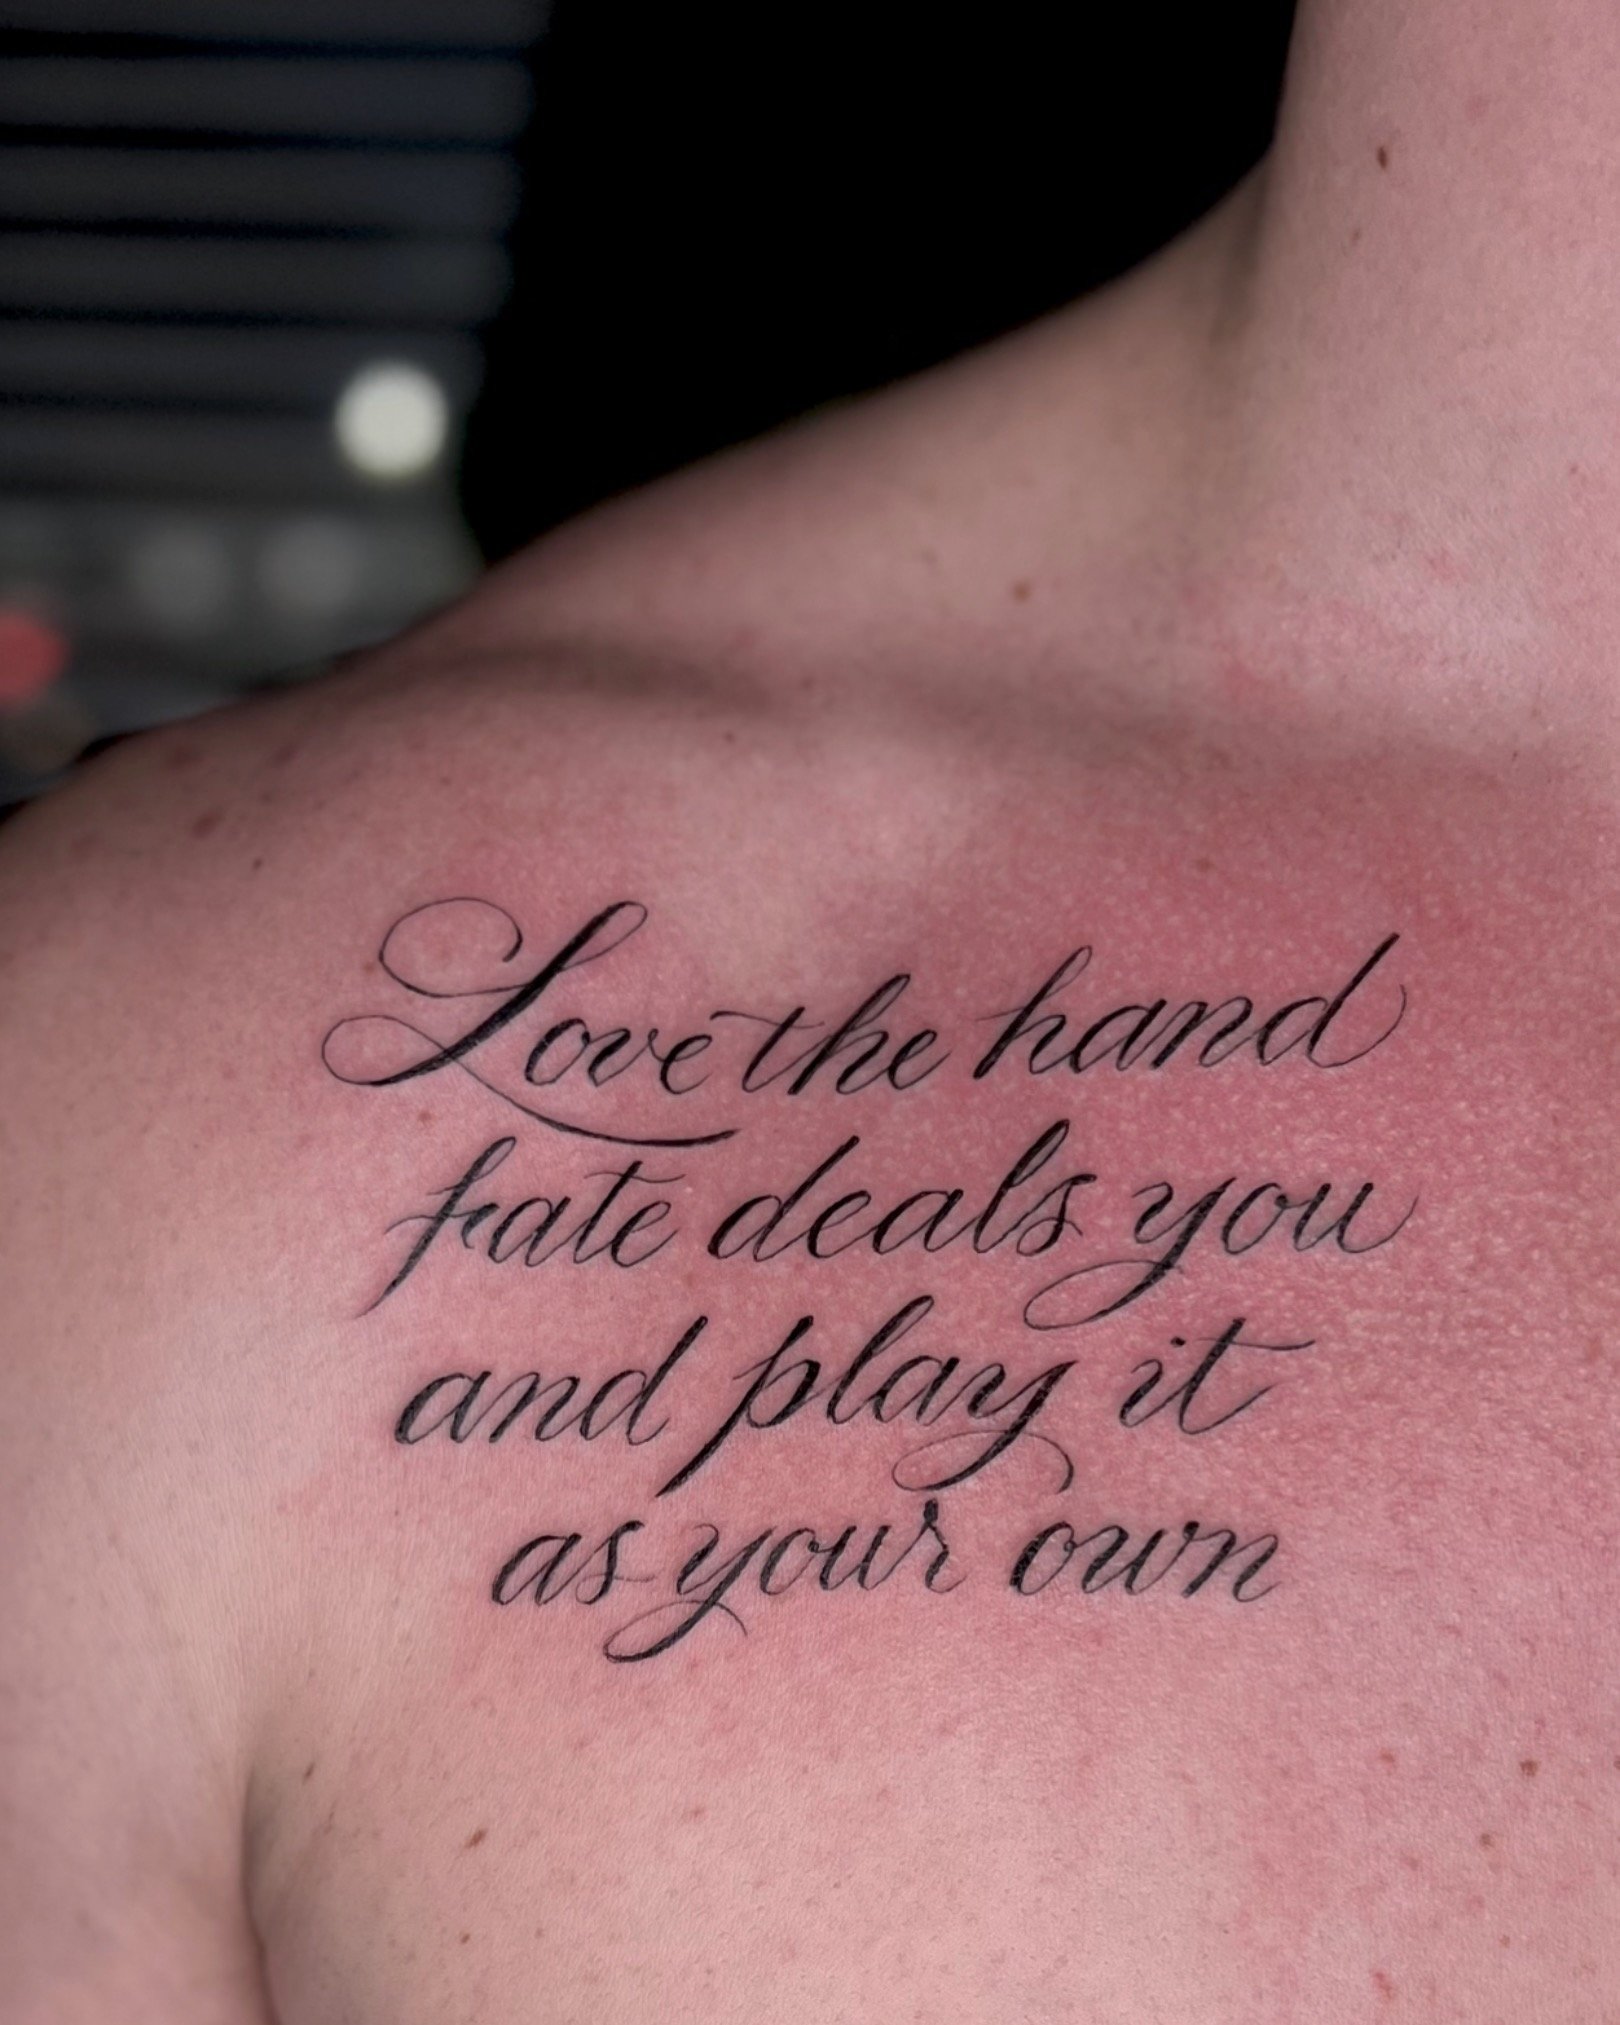  tattoo of a poem on chest  